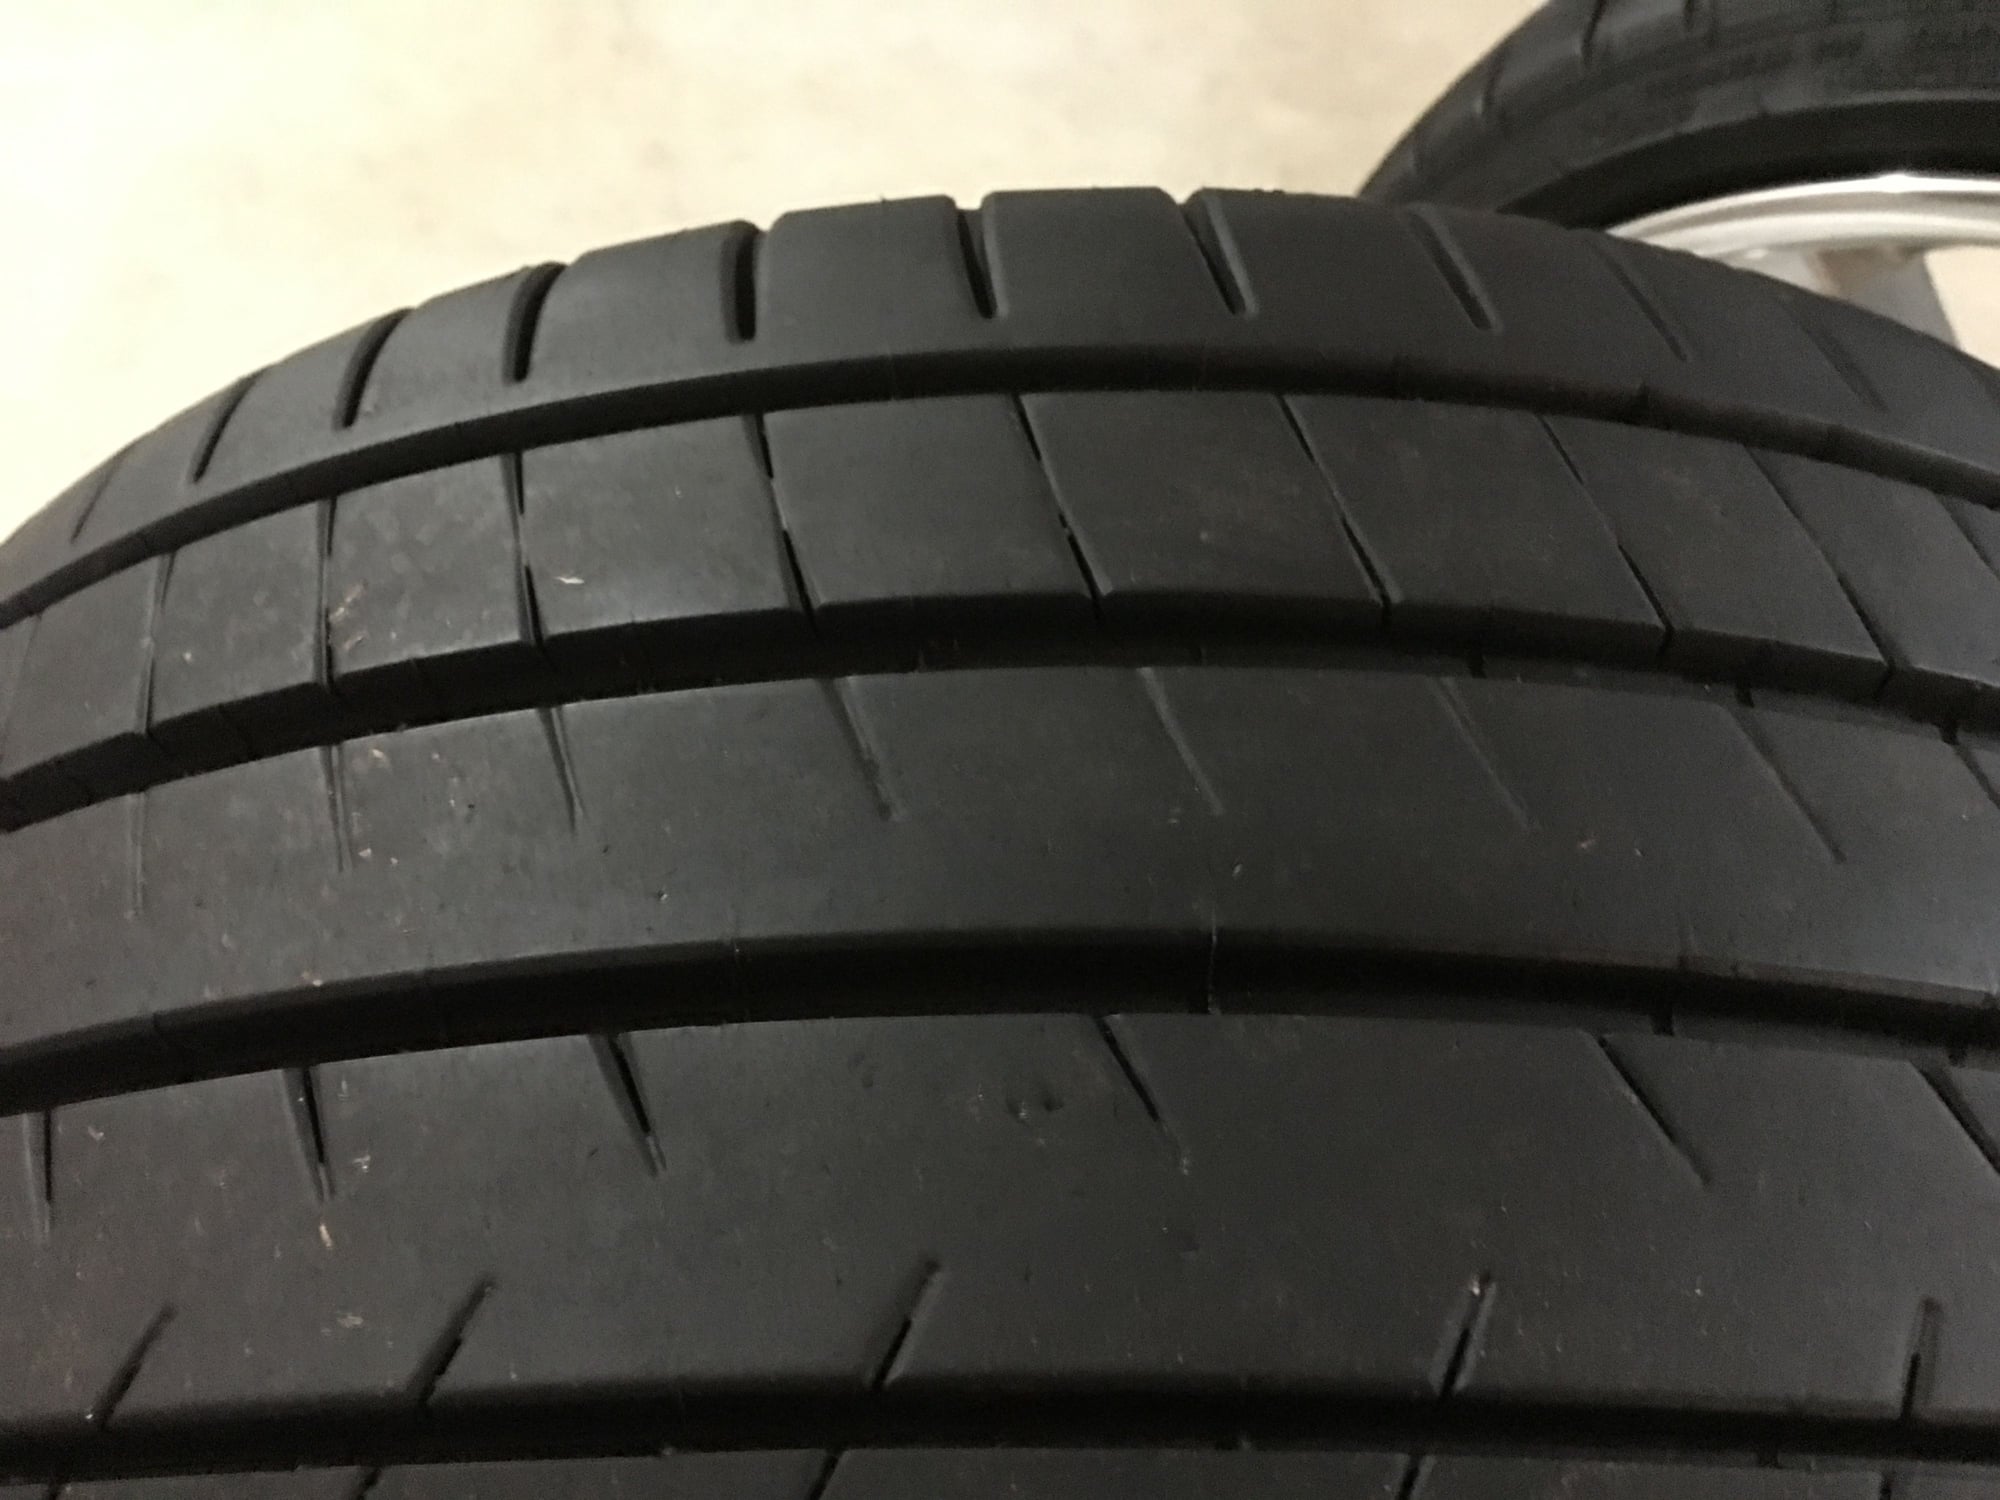 Wheels and Tires/Axles - FS:Weds KRANZE lxz - Used - Leominster, MA 01453, United States